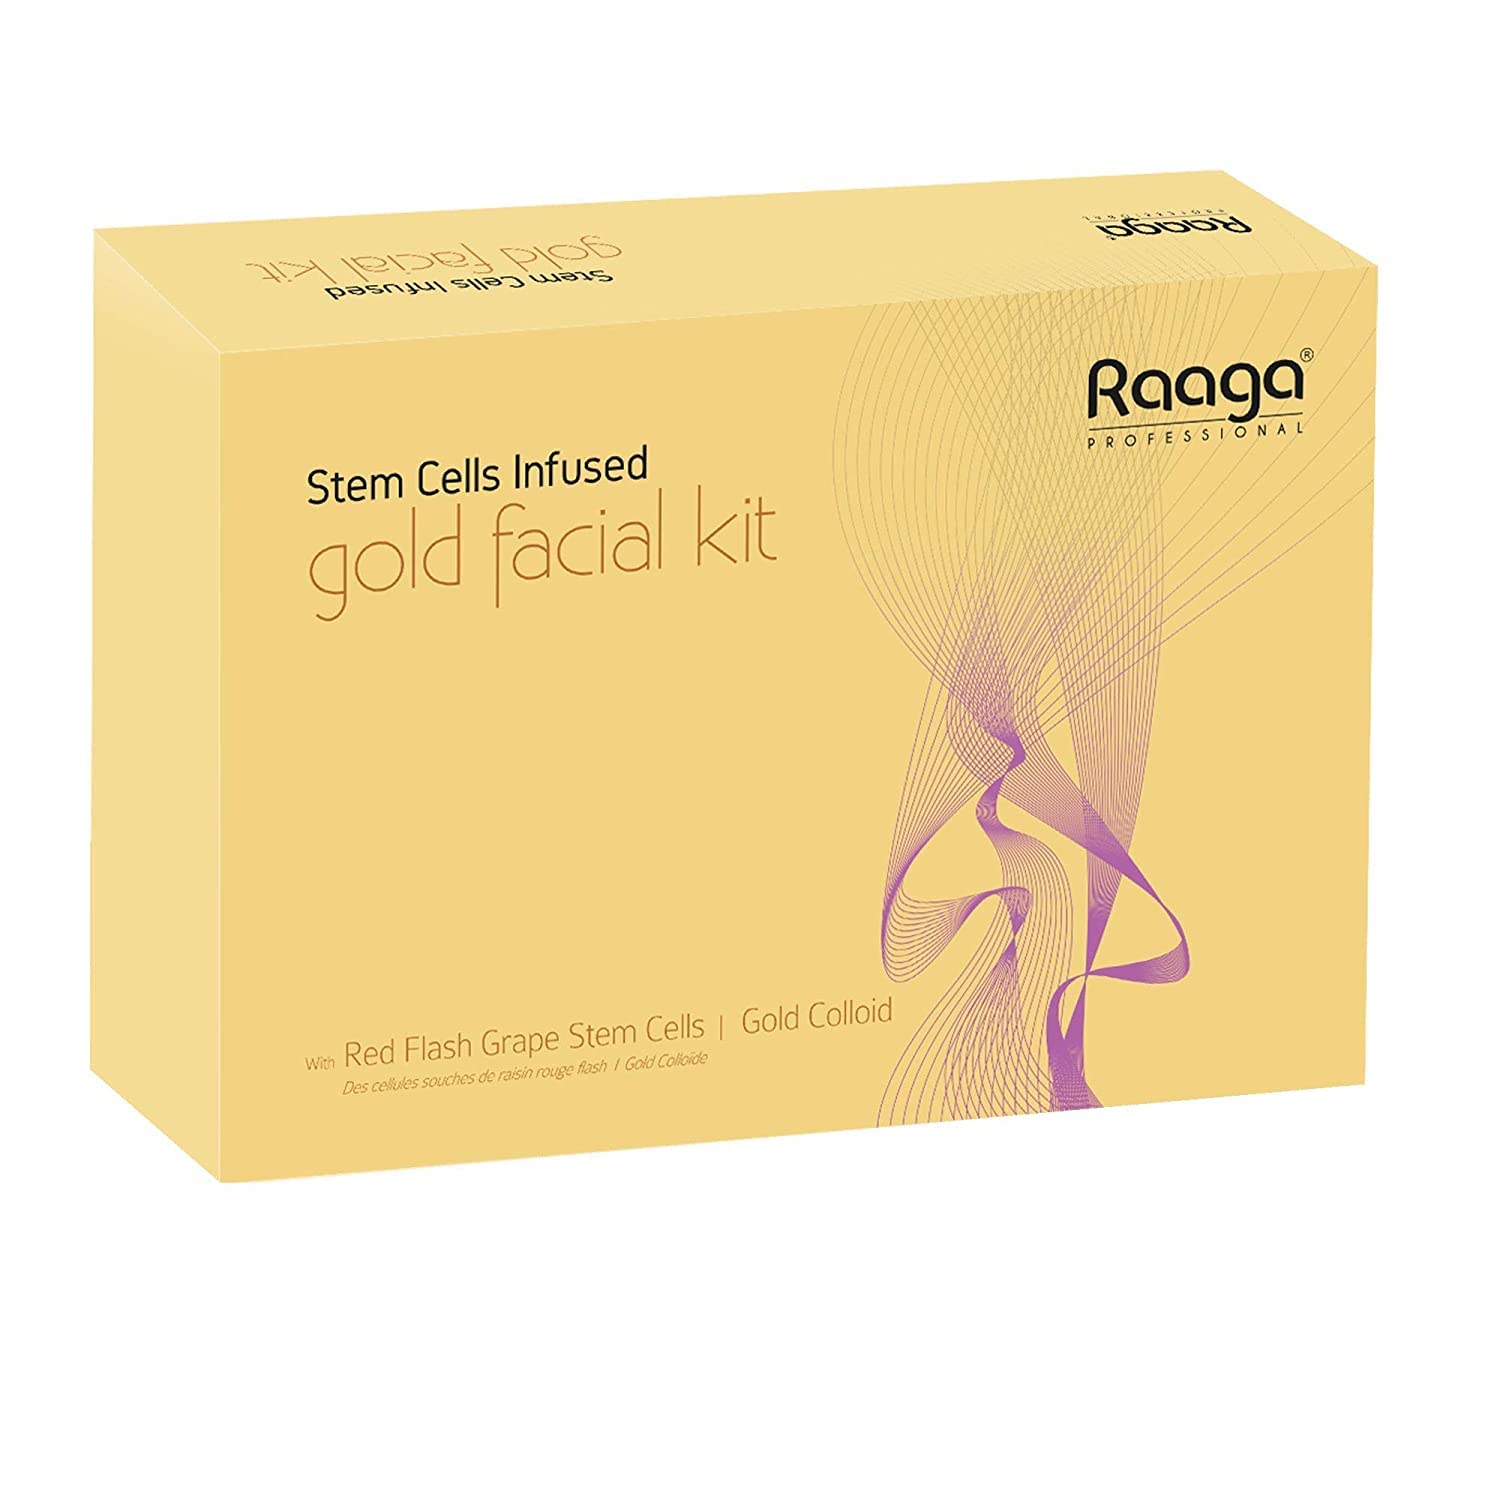 Buy Raaga Professional Stem Cells Infused Gold Facial Kit online usa [ USA ] 